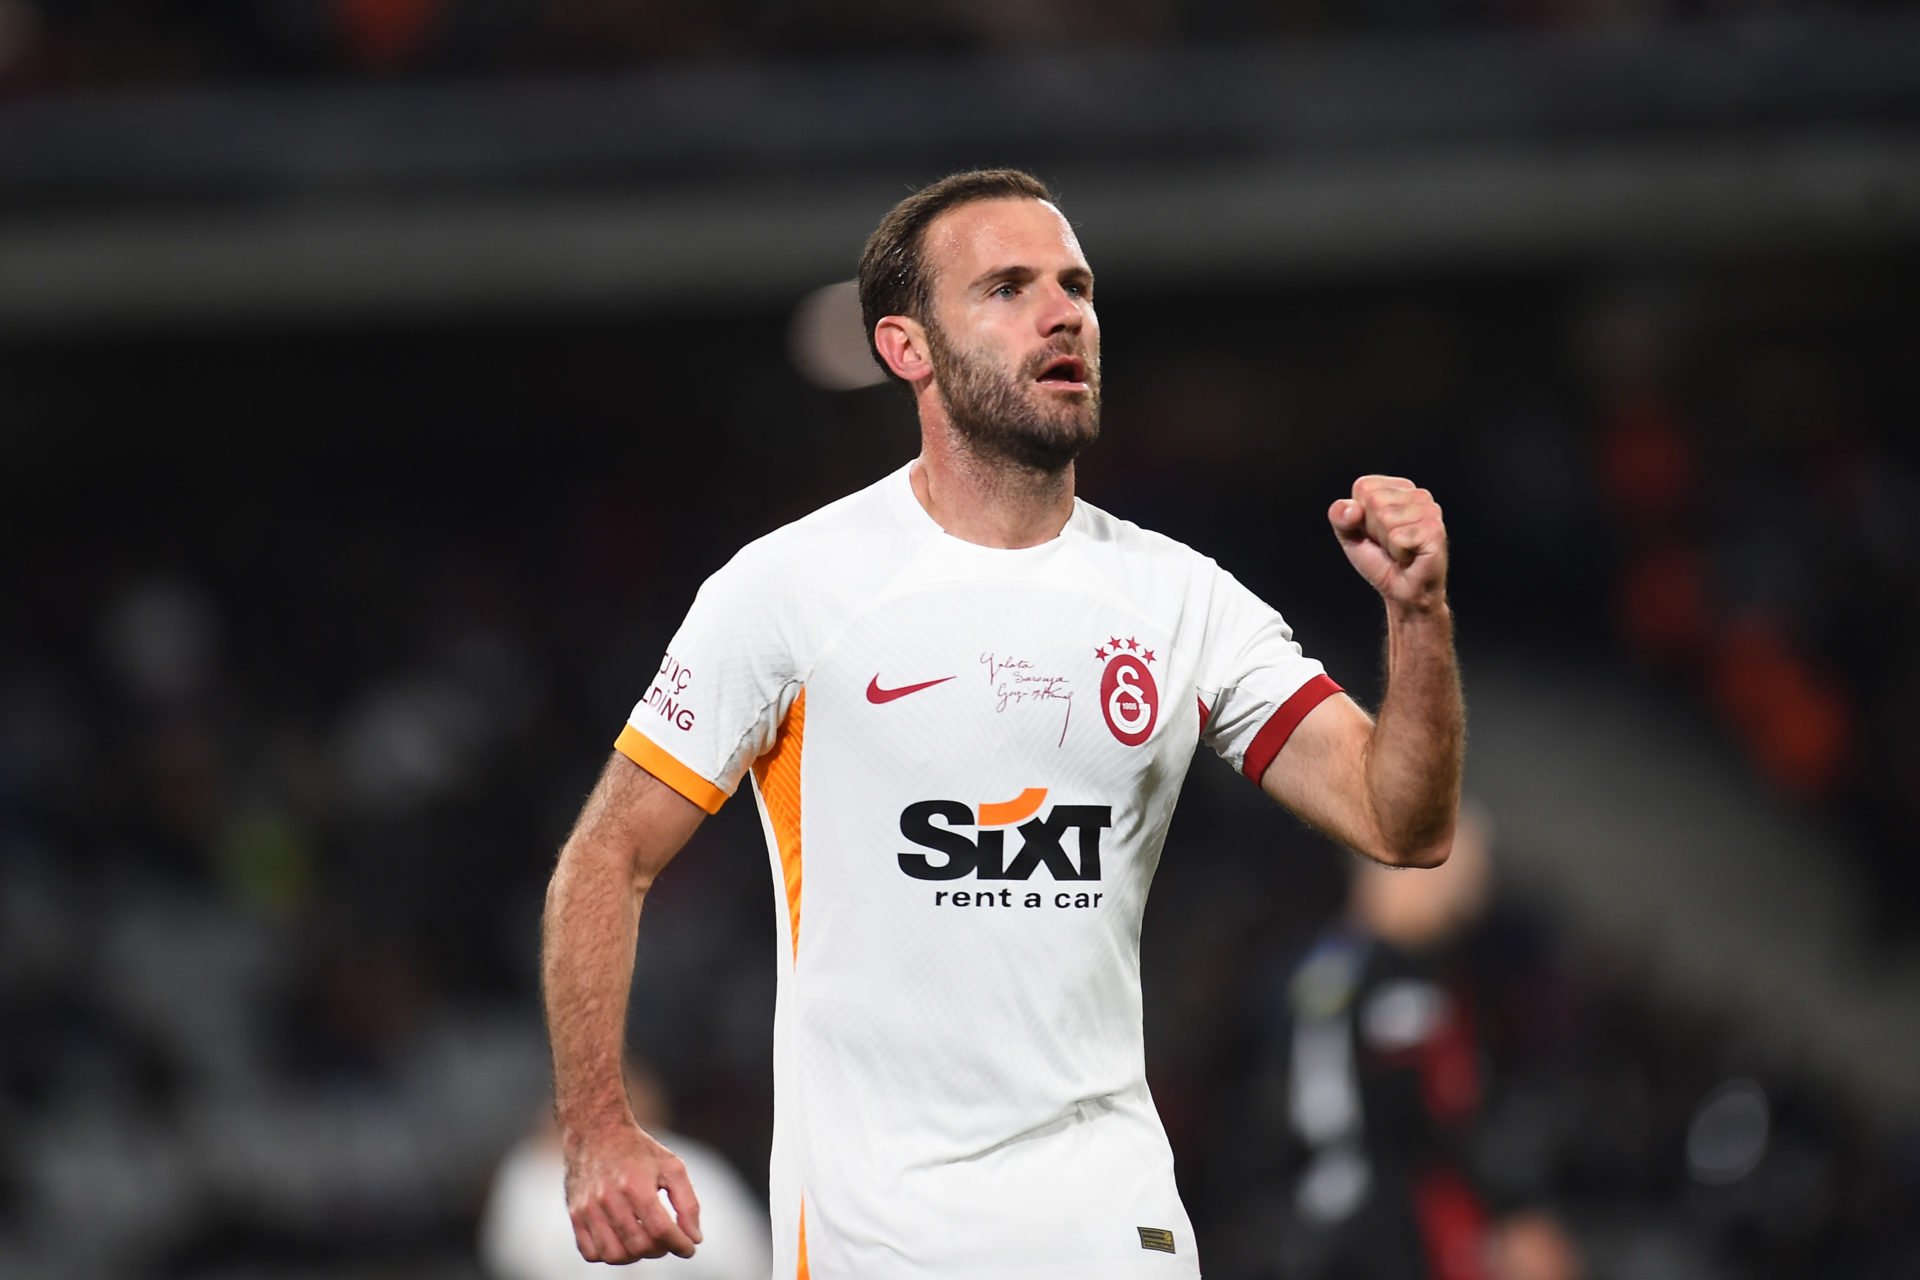 Juan Mata scores first goal for Galatasaray after leaving United